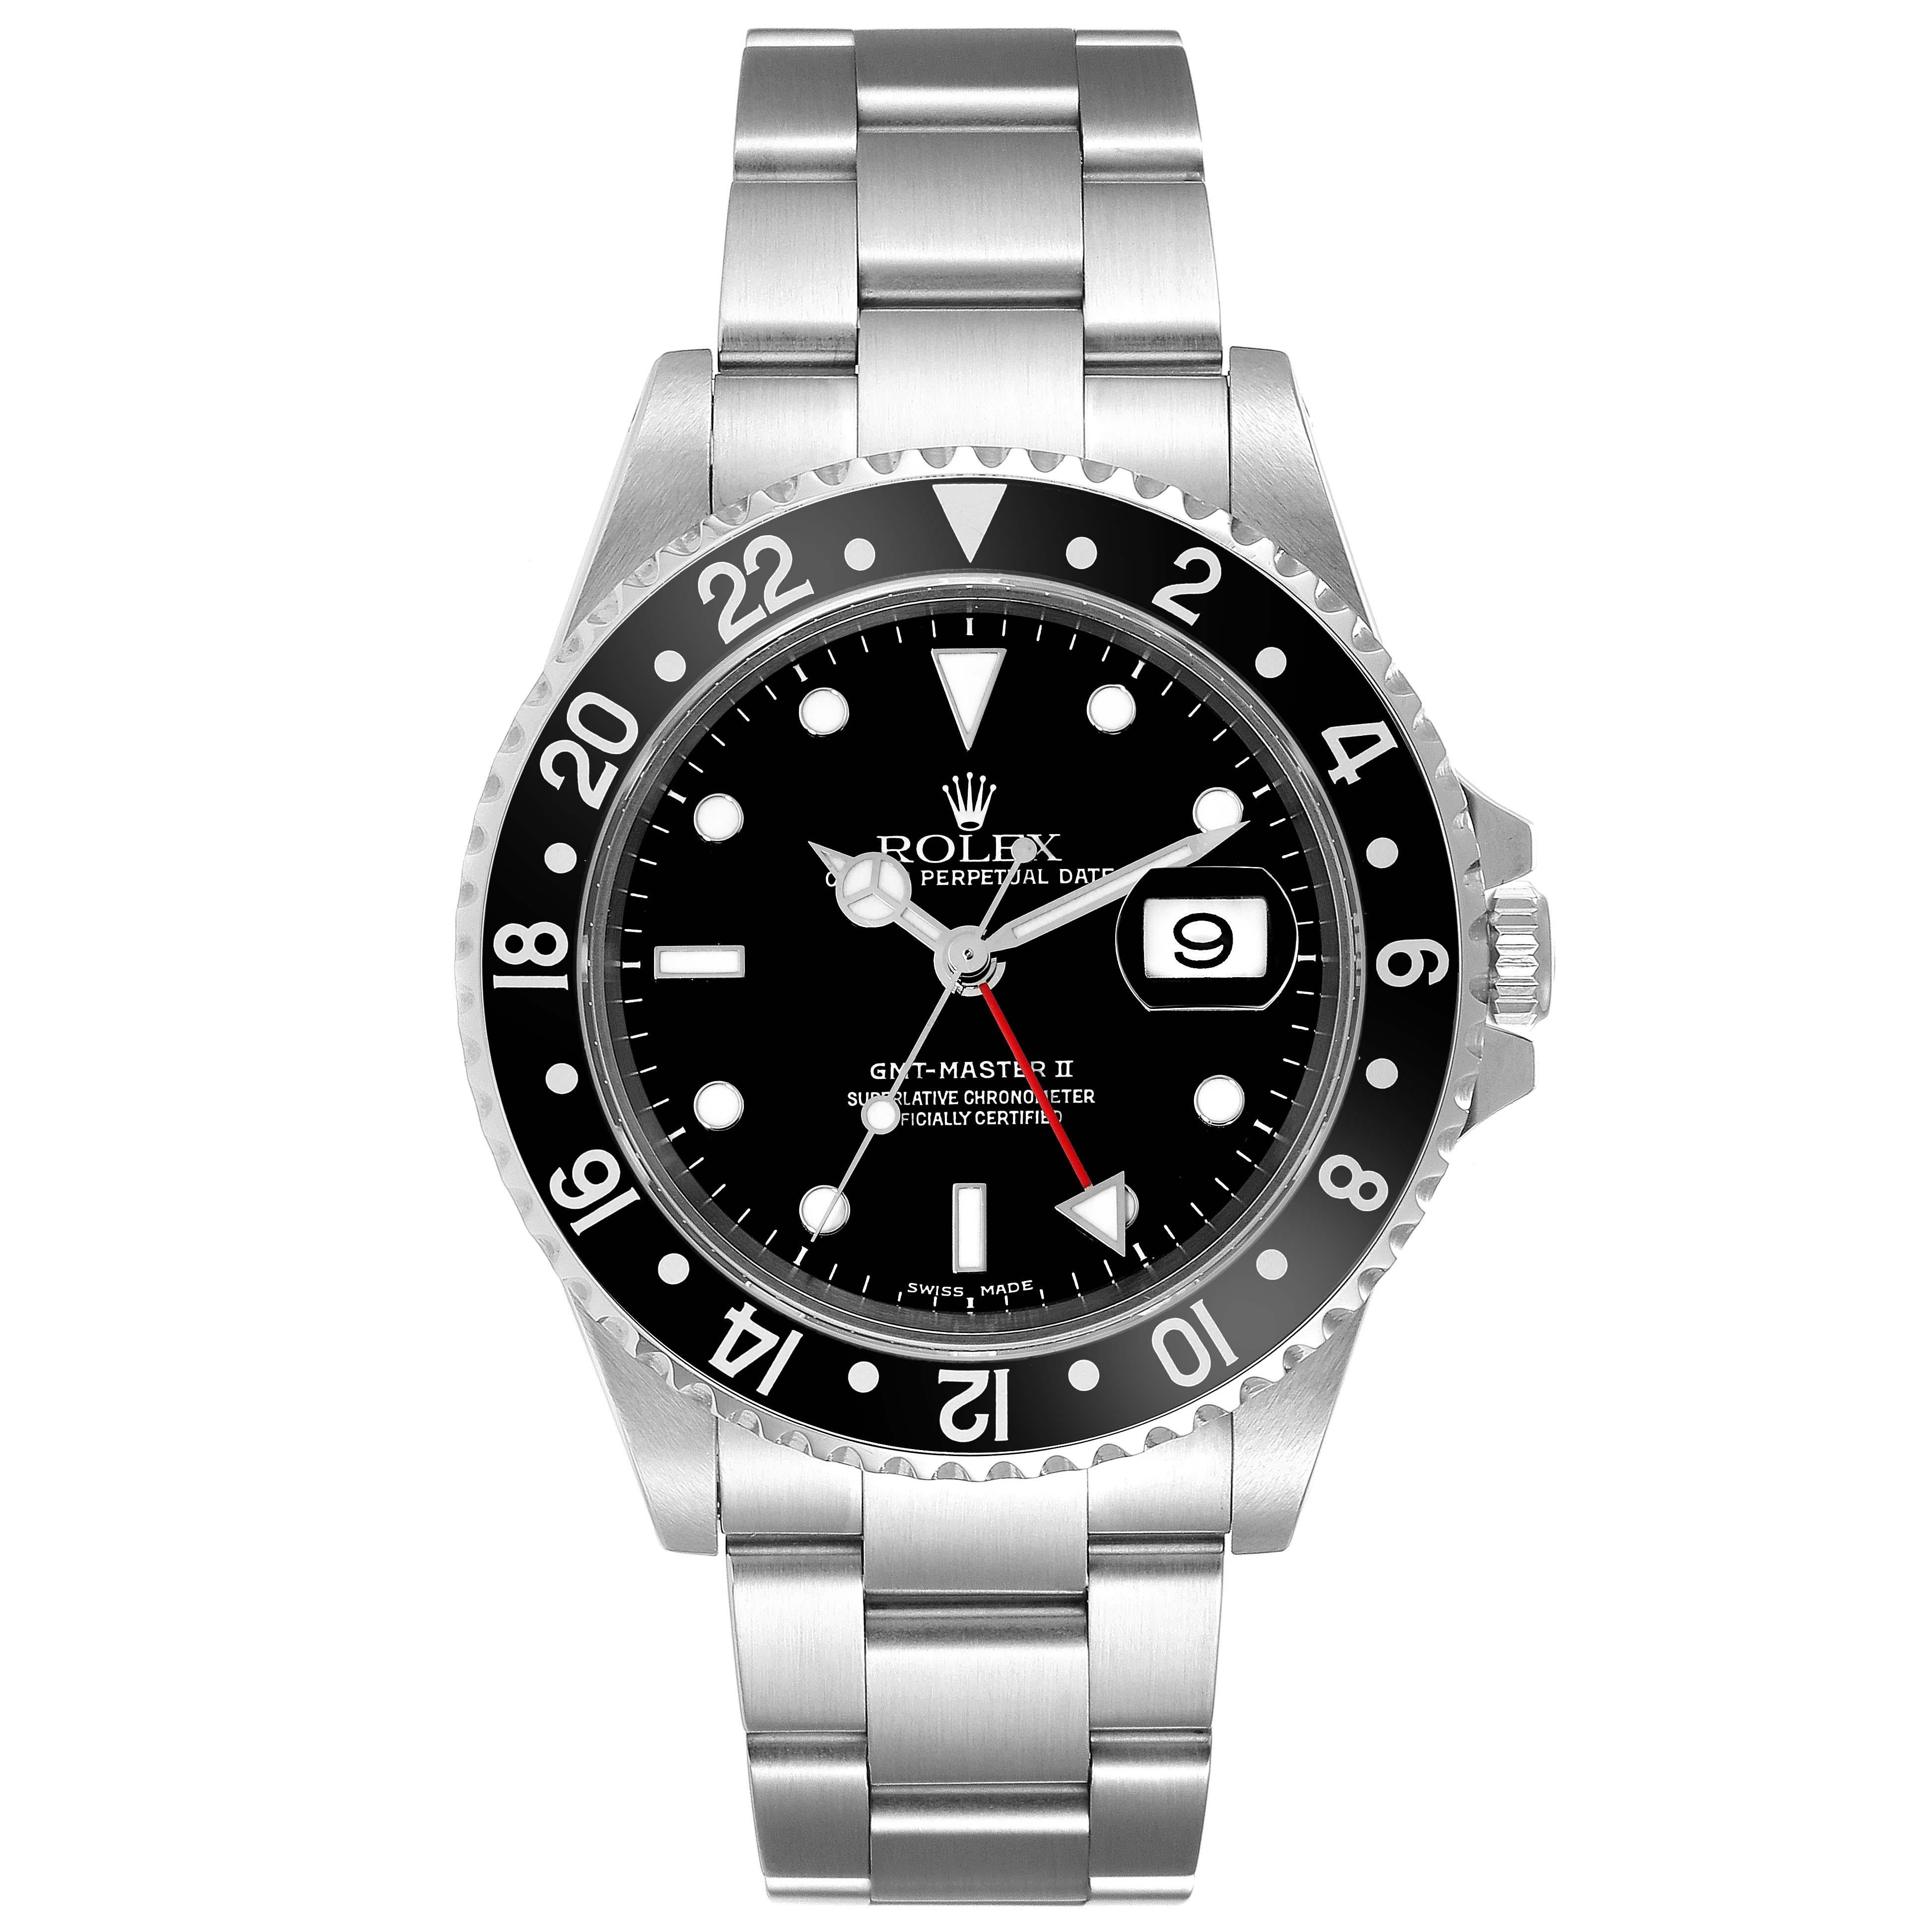 Rolex GMT Master II Black Bezel Dial Steel Mens Watch 16710 Box Papers. Officially certified chronometer automatic self-winding movement. Stainless steel case 40 mm in diameter. Rolex logo on a crown. Bidirectional rotating bezel with a special